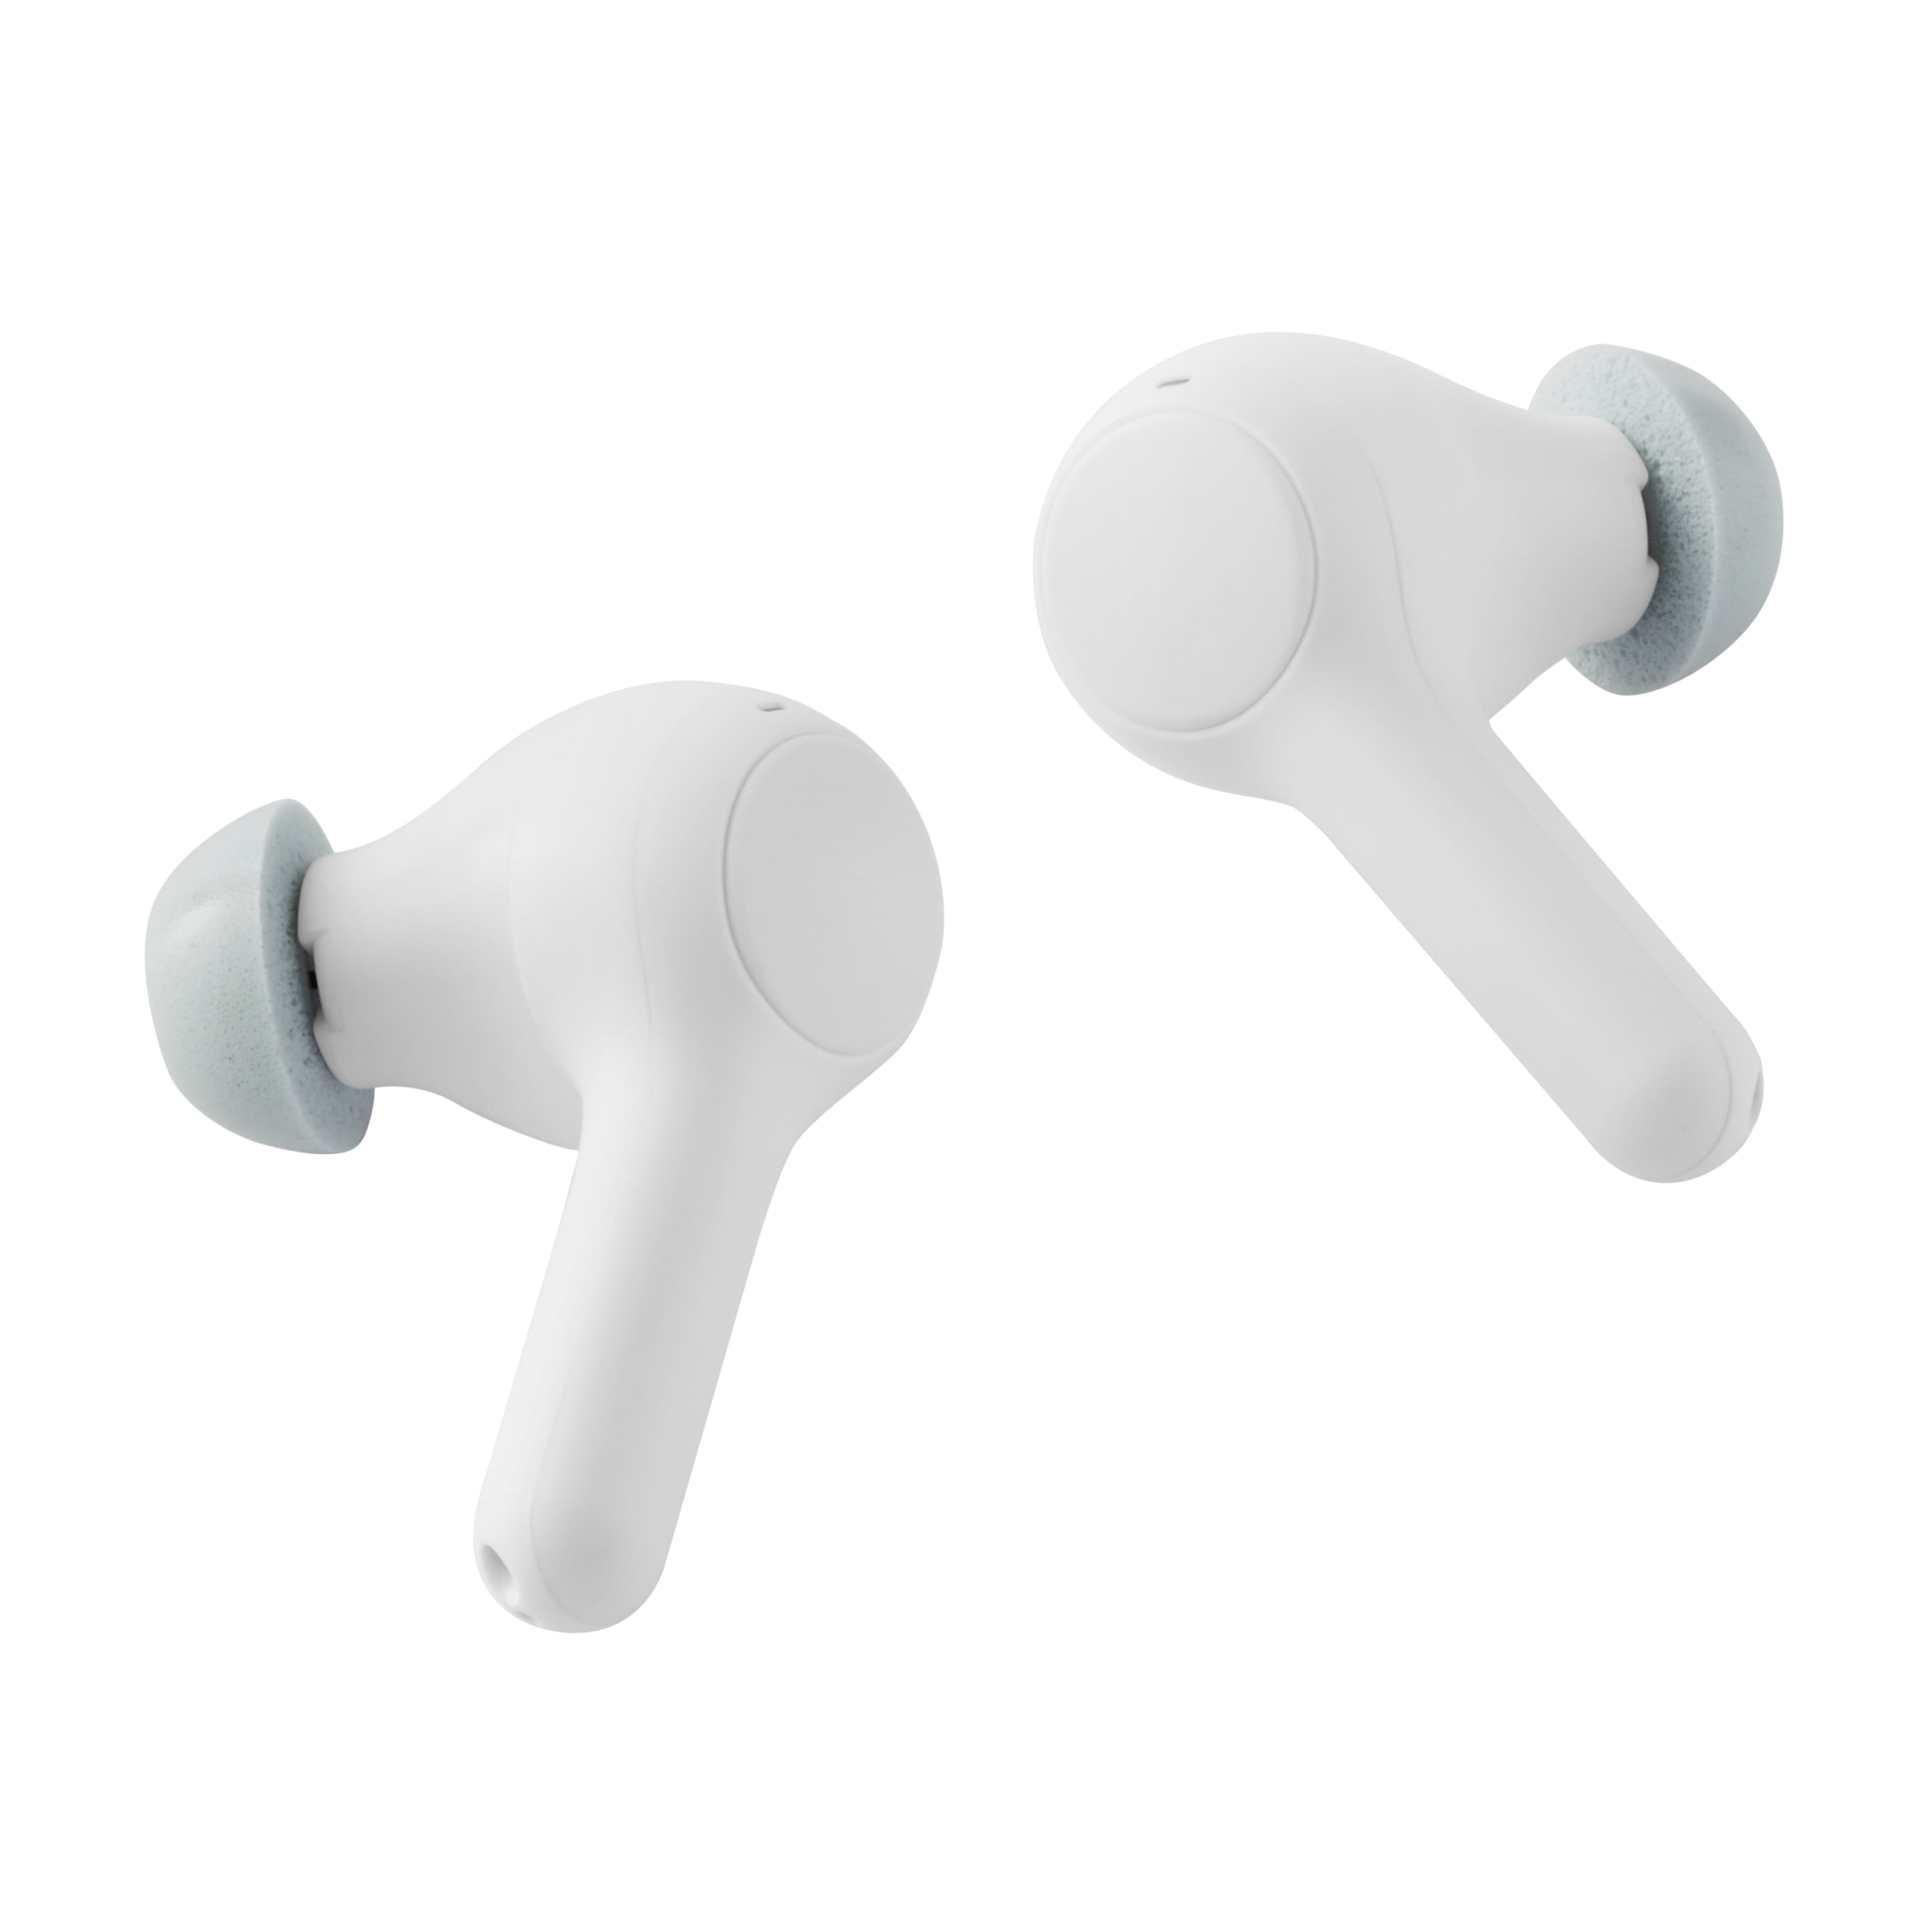  OnePlus Buds Pro True Wireless Earbuds White, Smart Active  Noise Cancelling, Wireless Charging Case Included, Dual Connection, 38 Hour  Playtime, Fast Charging, Water Resistant, Glossy White : Electronics